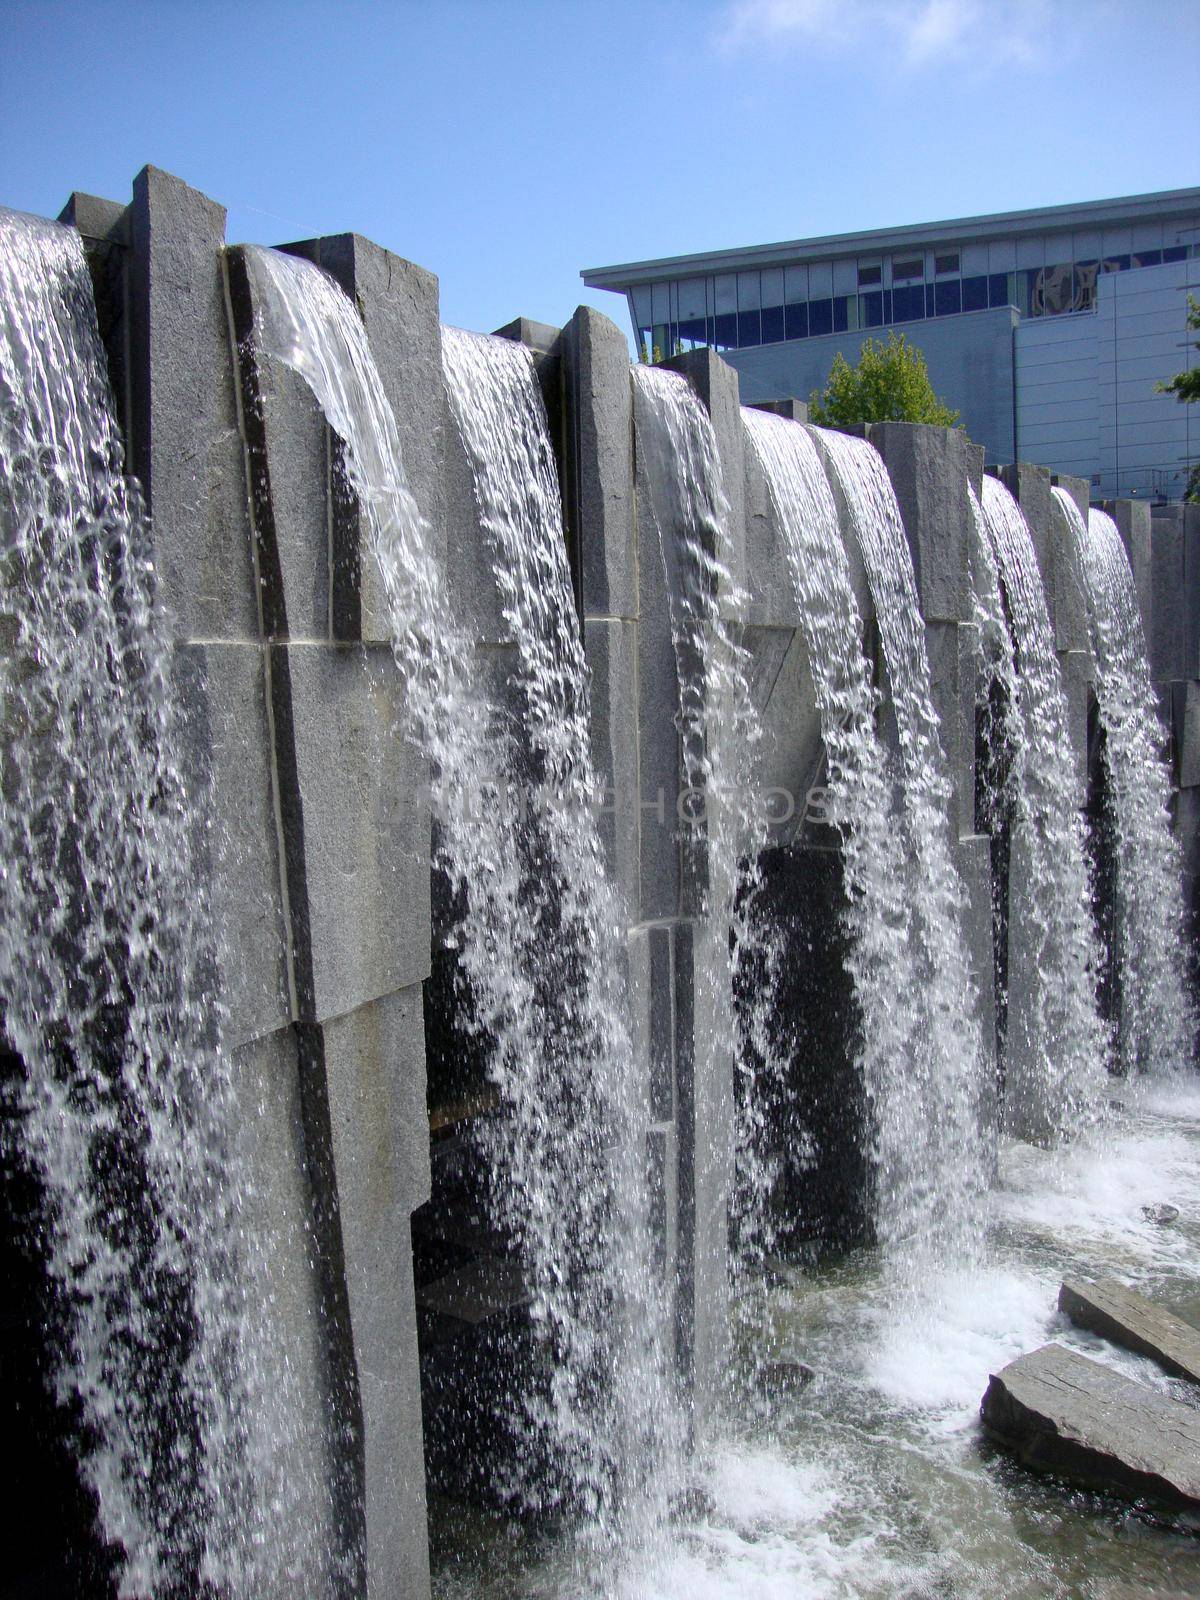 San Francisco - July 11, 2010:  Waterfall at Martin Luther King, Jr. Memorial at Yerba Buena Gardens.  The vision of peace and international unity is enshrined in this memorial featuring a majestic waterfall and shimmering glass panels inscribed with Dr. King’s inspiring words, poems and images from the civil rights movement. Artist and sculptor, Houston Conwill, created this memorial in collaboration with poet Estella Conwill Majoza and architect Joseph De Pace.